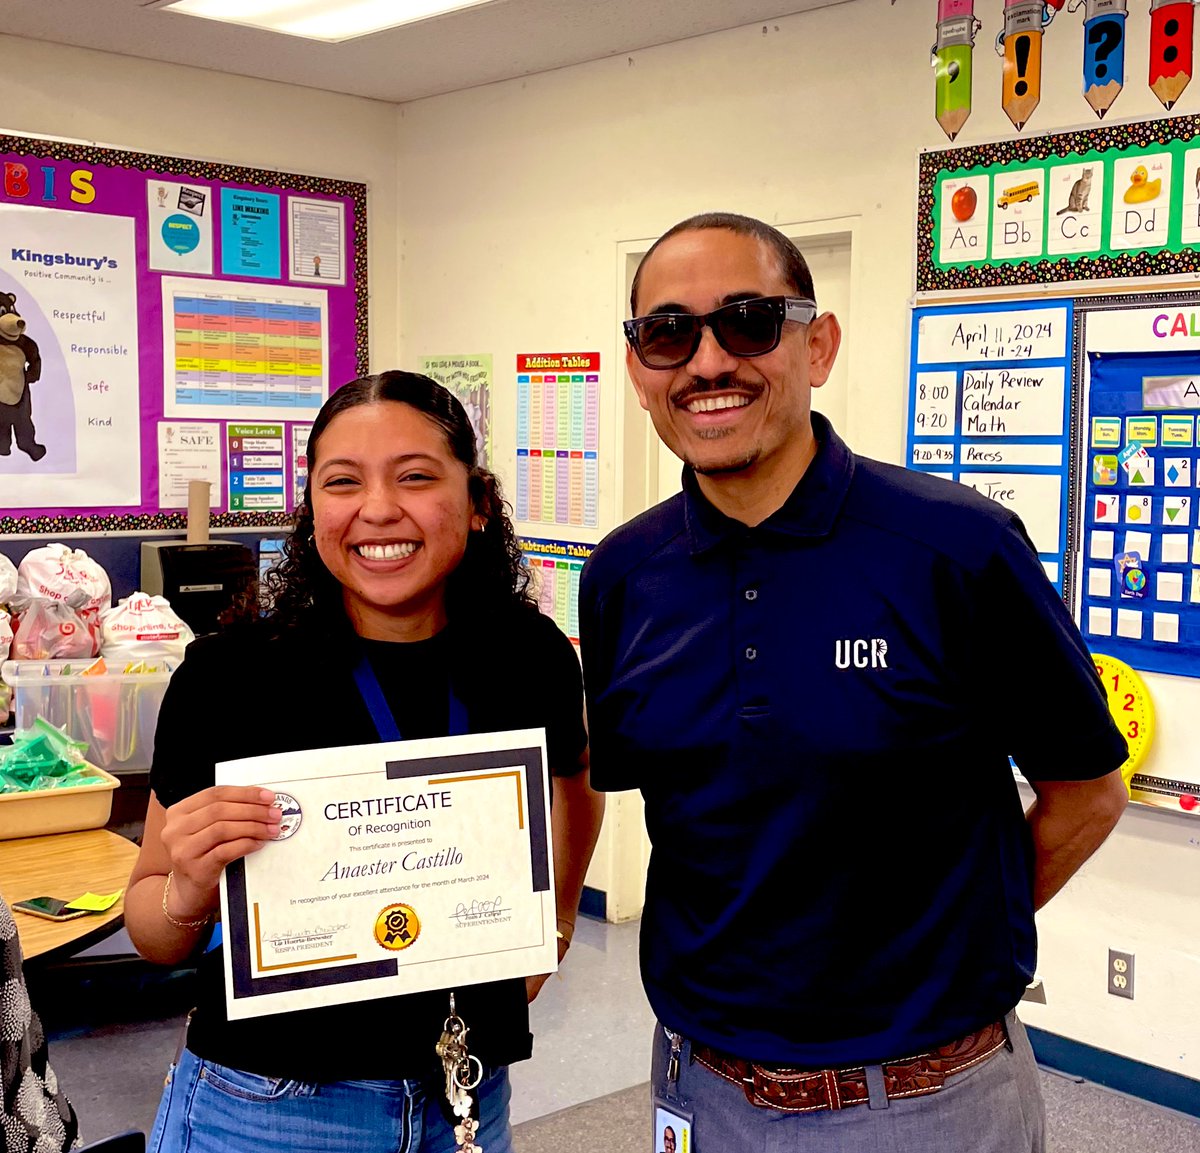 Just a few pics from visits to @BrynMawrRUSD @CopeMiddleRUSD @KingsburyRUSD to celebrate classified team members for excellent Feb/March attendance. Huge THANK YOU to almost 400 employees who earned awards! @RedlandsUSD #ThisIsRUSD